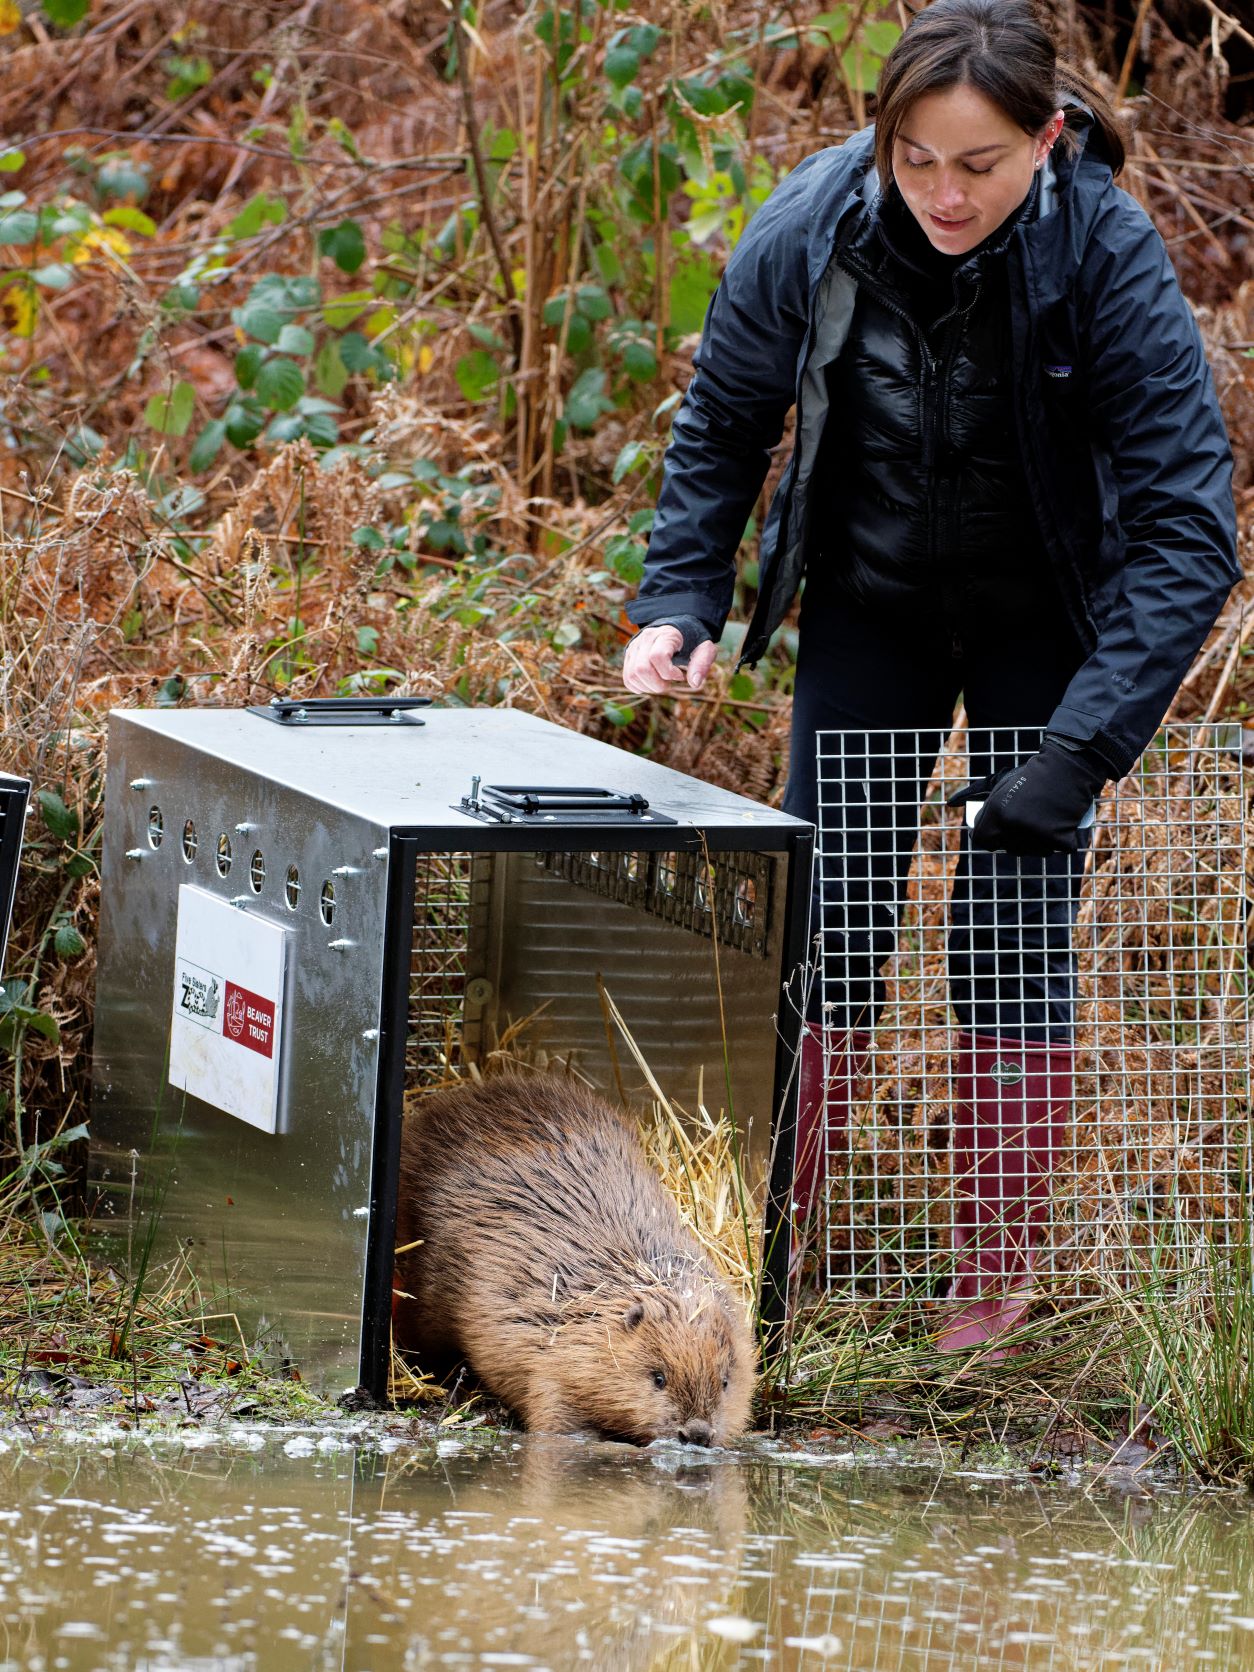 Mandy Lieu releases one of the beavers from its travelling box and it is moving into the water in front of it.